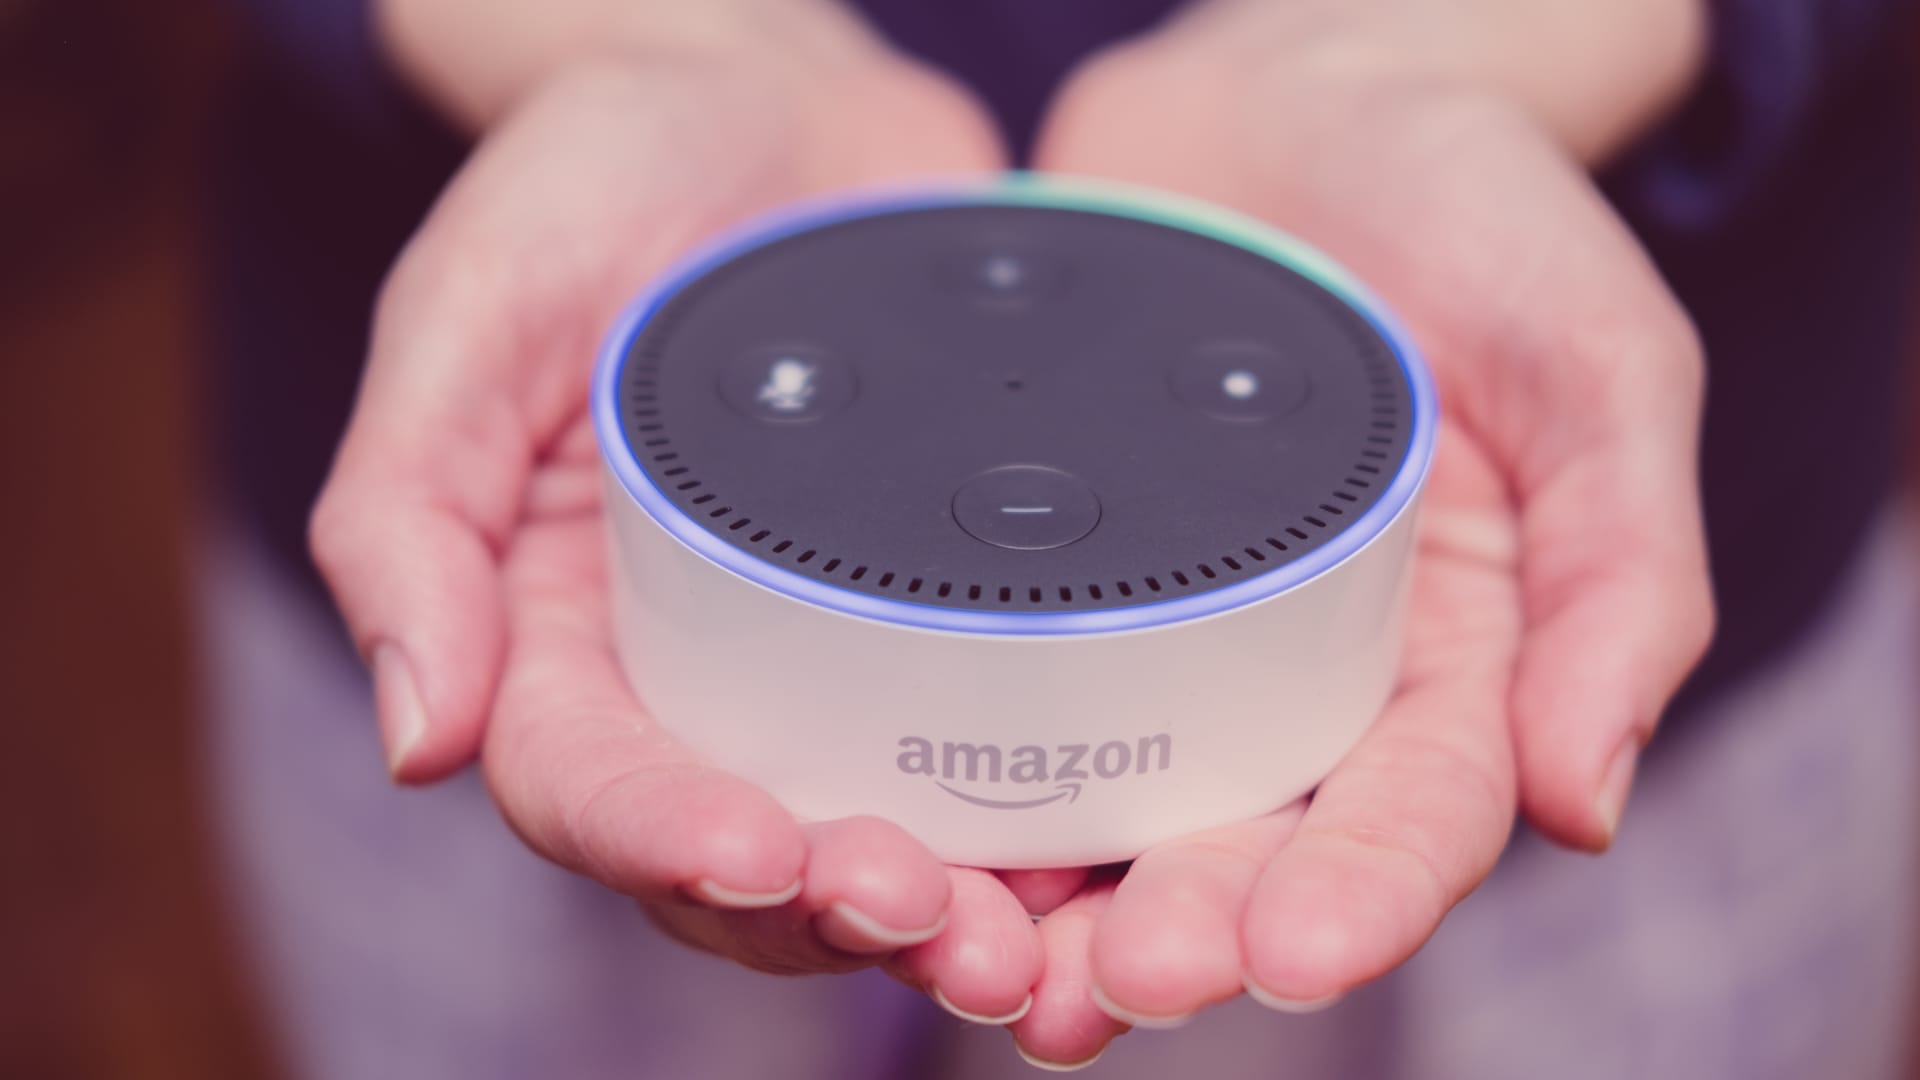 Amazon is devising a way for users to speak to their family members through its Alexa voice assistant, even after they've died. At Amazon's 